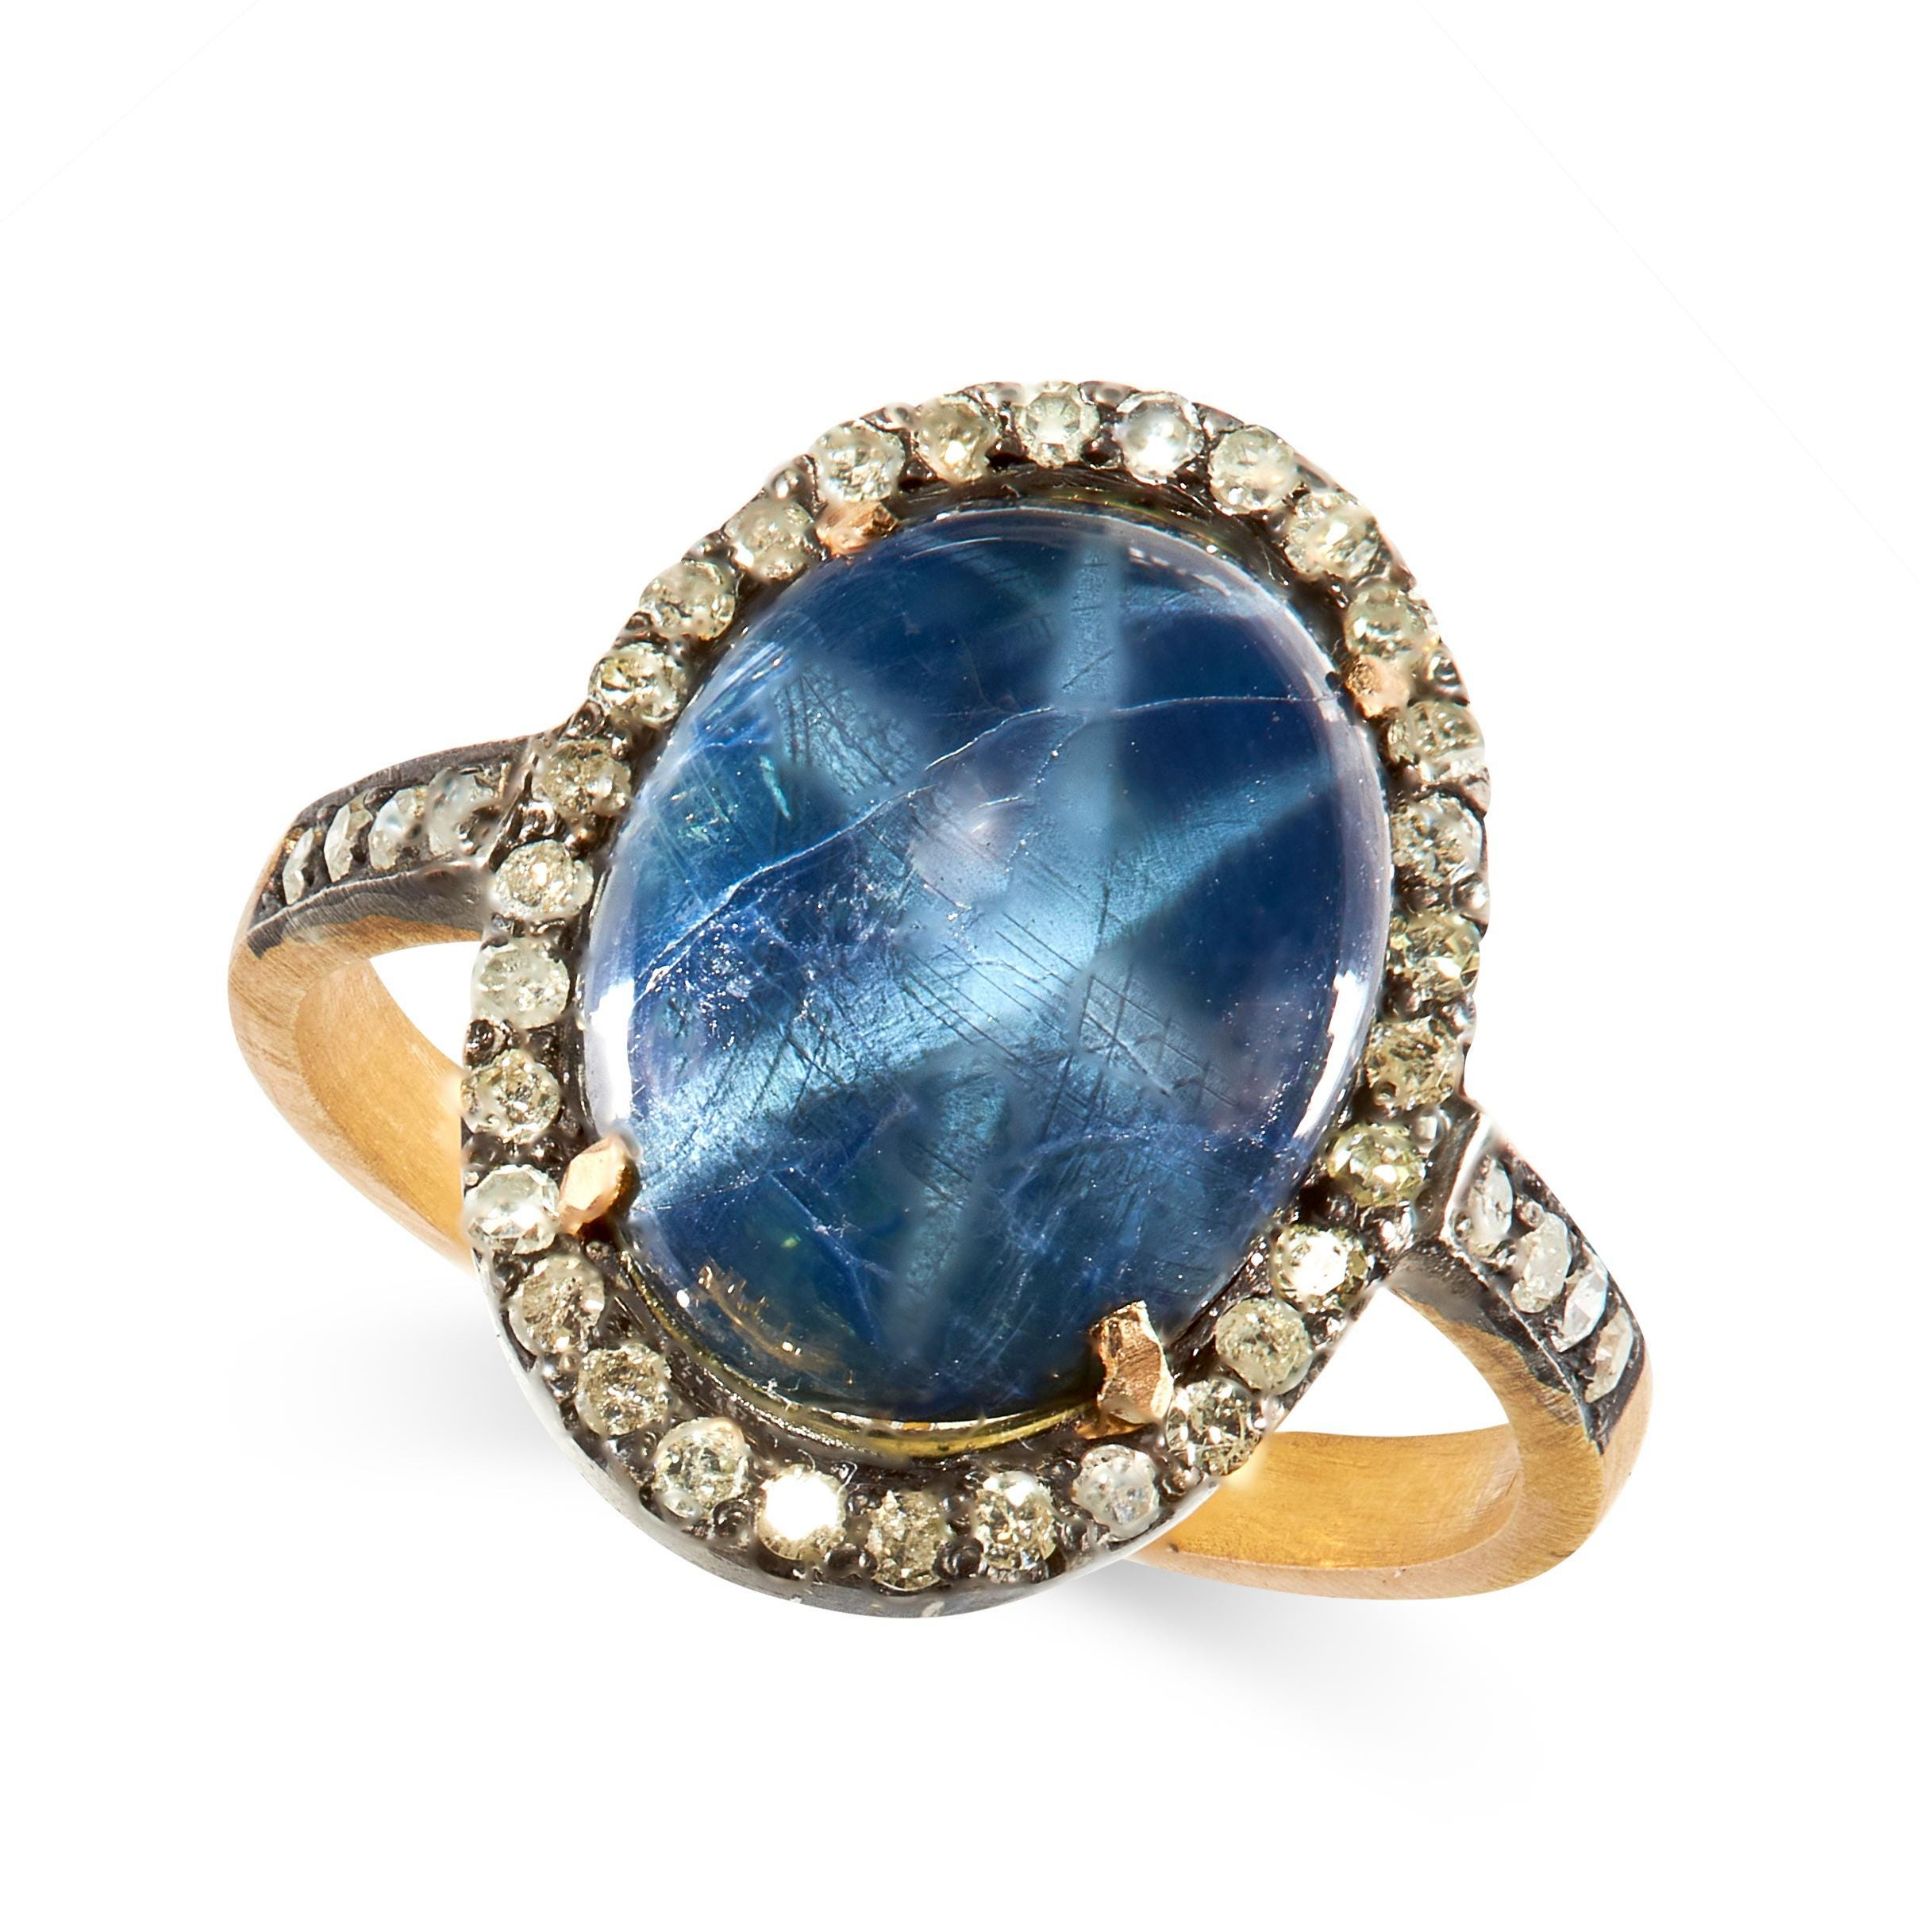 STAR SAPPHIRE AND DIAMOND RING in silver and gold, claw-set with a cabochon star sapphire weighing